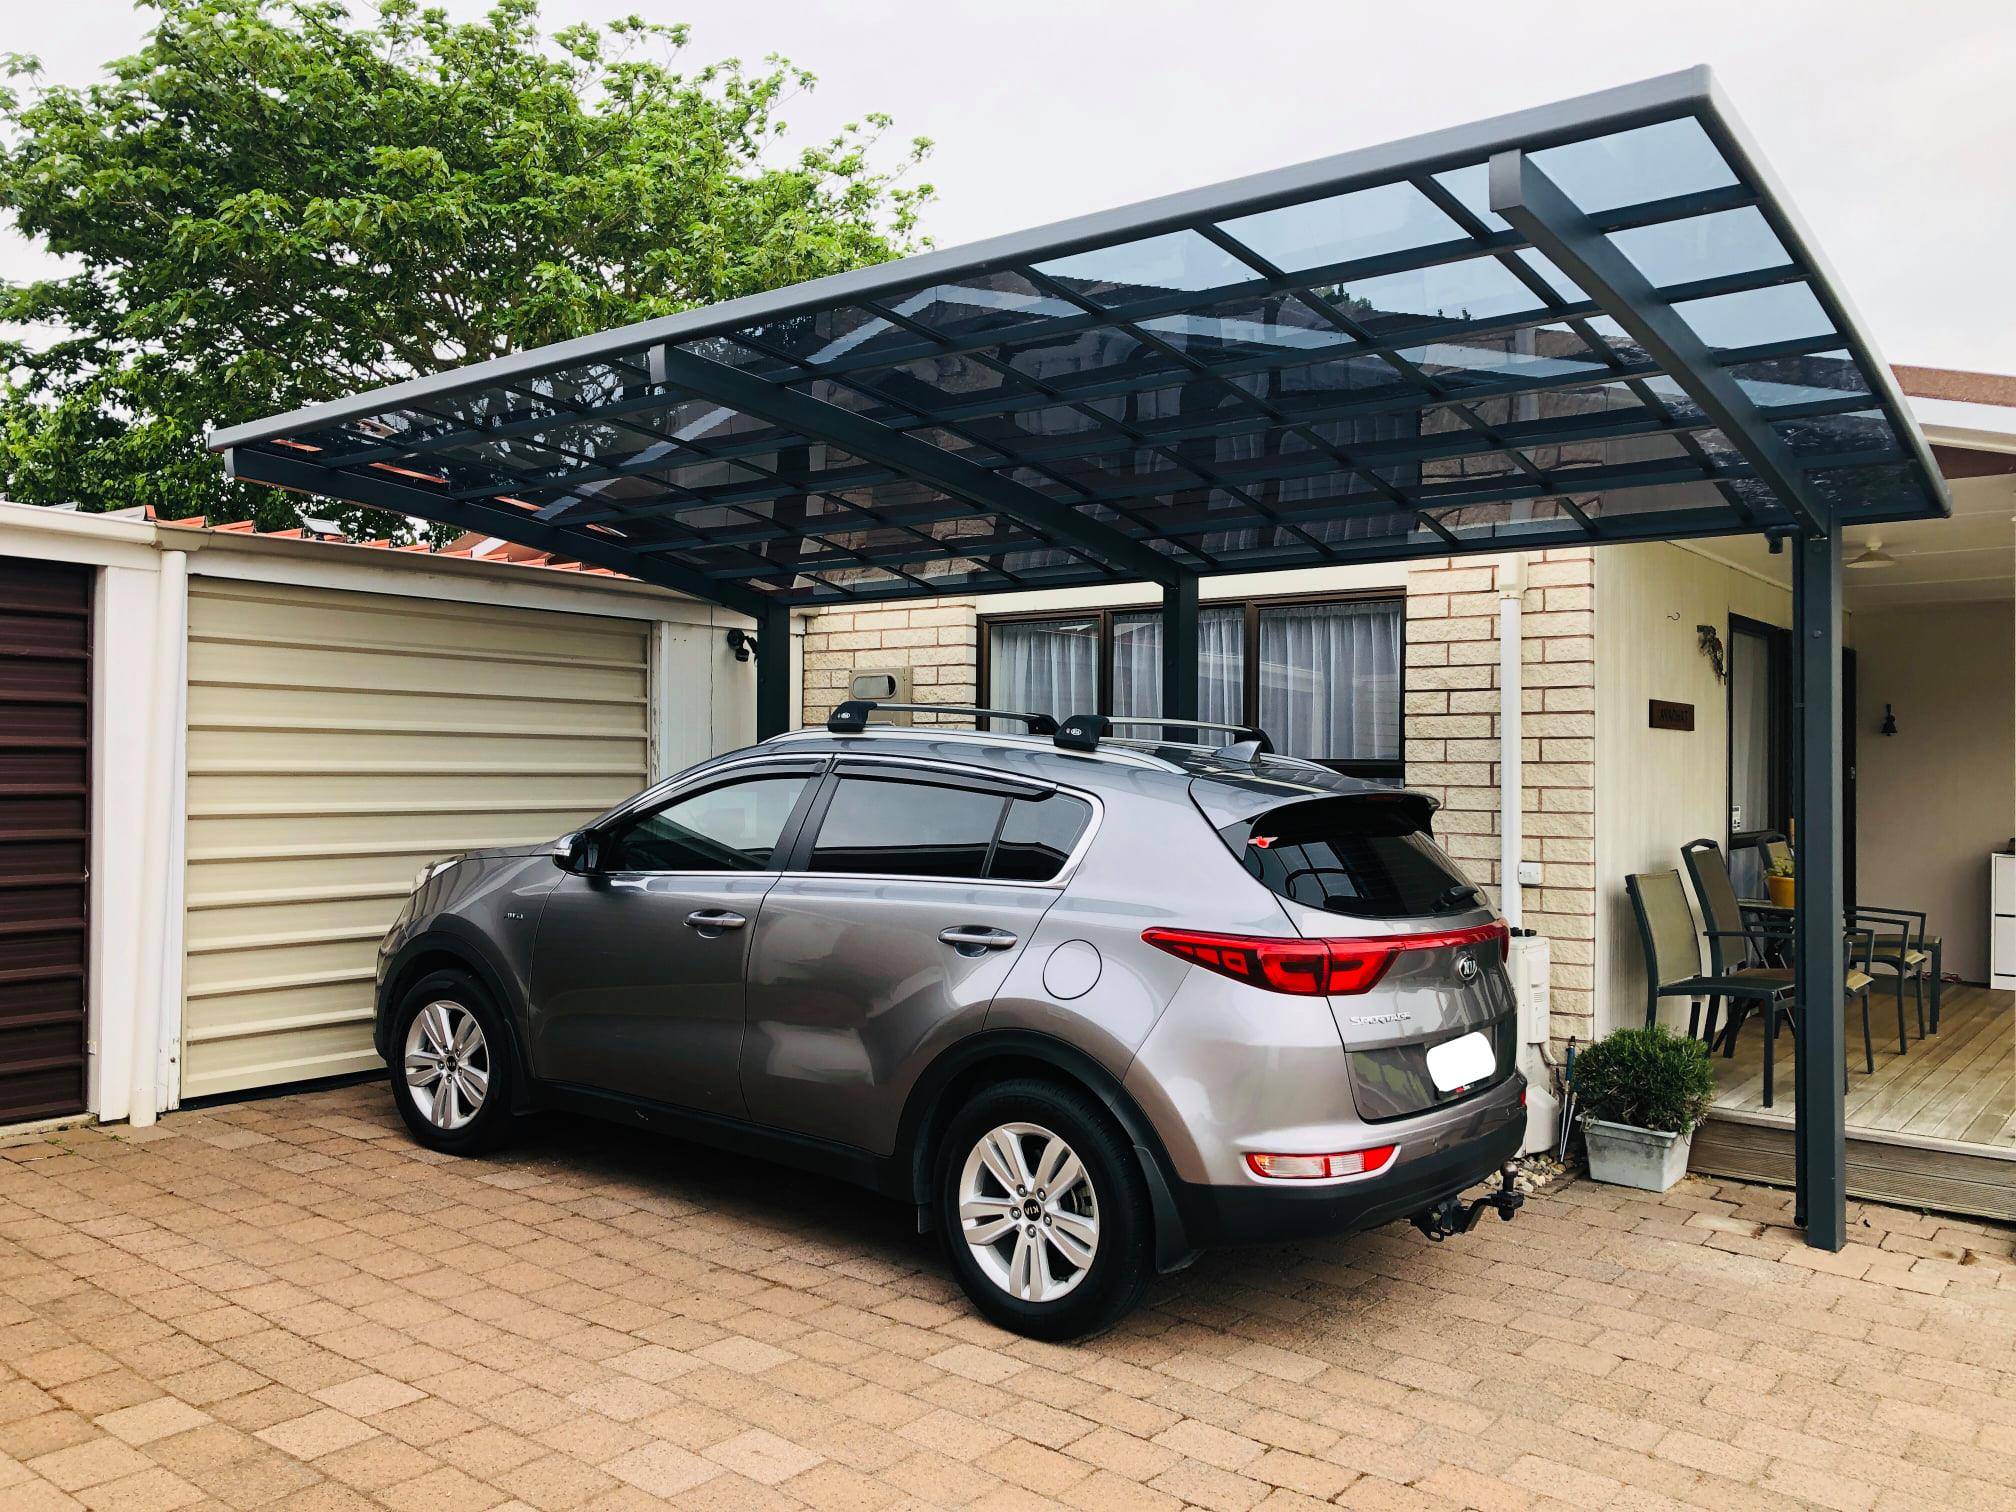 Cantilever Single Carport Living Space Furniture And Decor